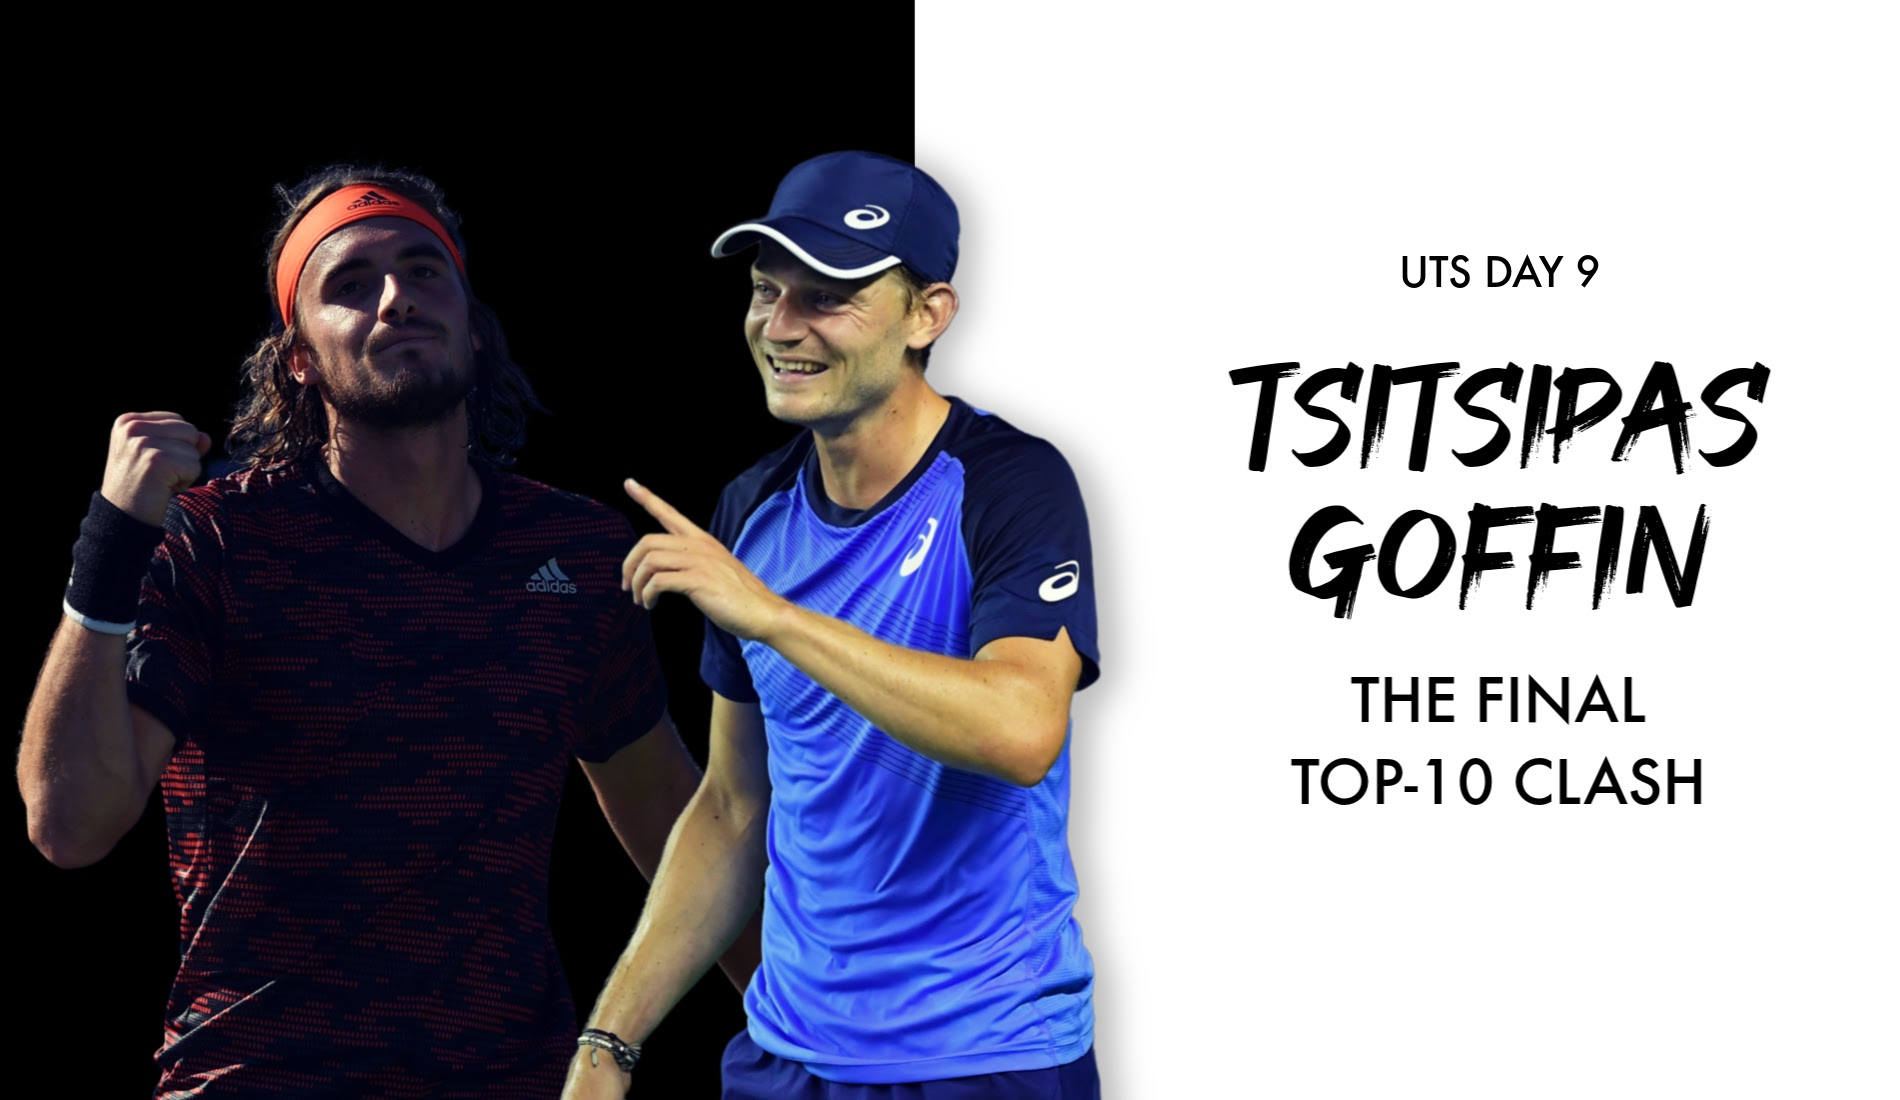 David Goffin faces Stef Tsitsipas on UTS Day 9